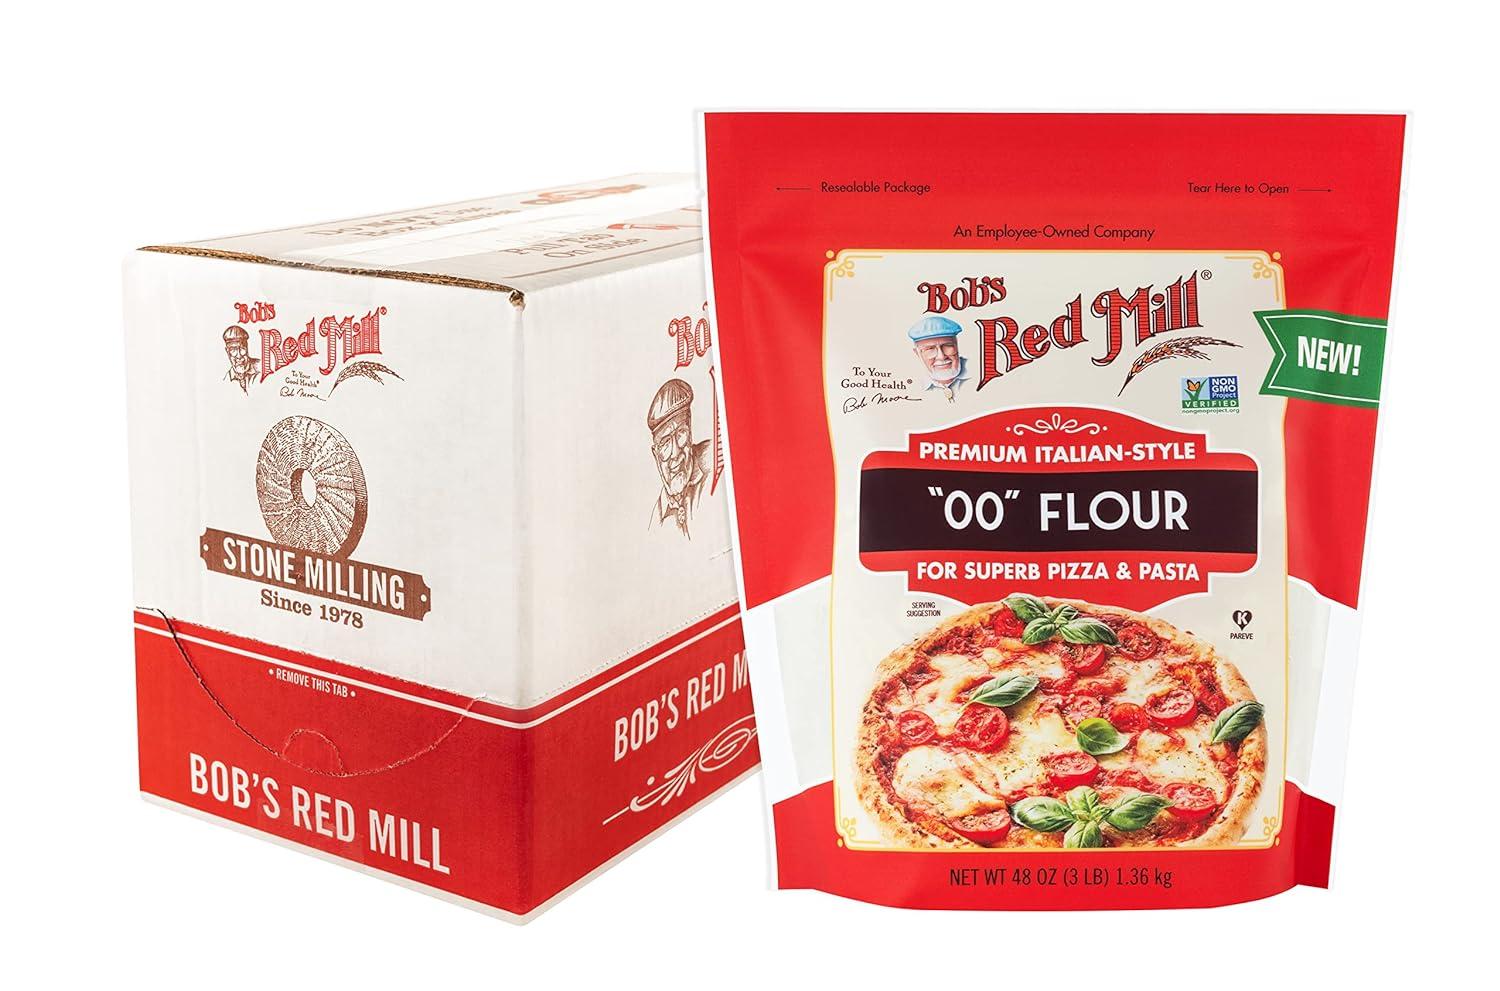 Bobs Red Mill Premium Italian-Style 00 Flour 4 Pack for $13.99